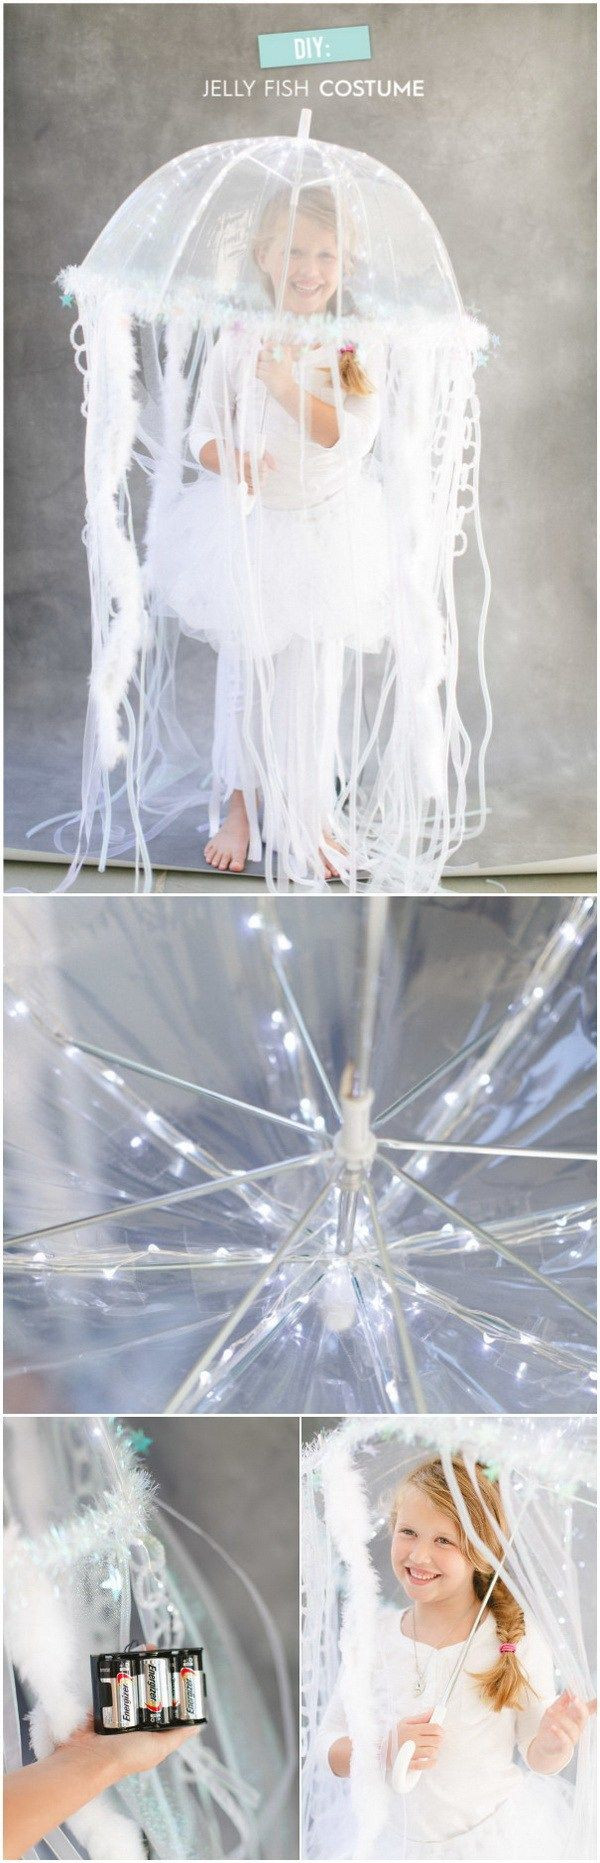 Jellyfish Costume DIY
 25 best ideas about Jelly fish costume on Pinterest